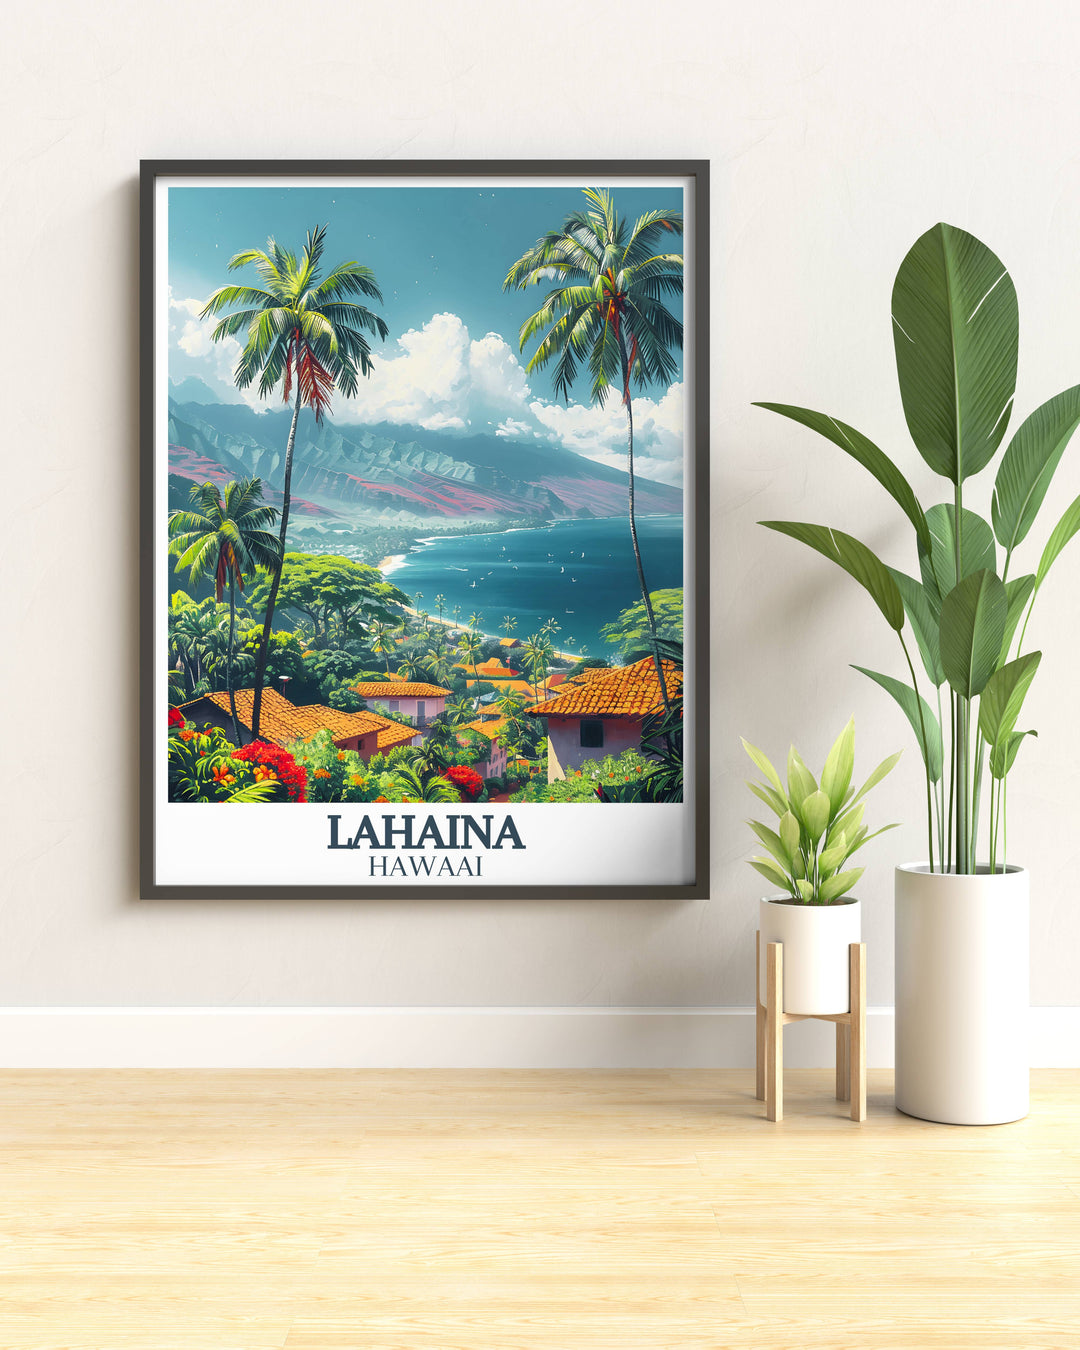 Vintage poster of Lahaina, Hawaii, with a classic look of the beach and palm trees, suitable for creating a nostalgic tropical decor.